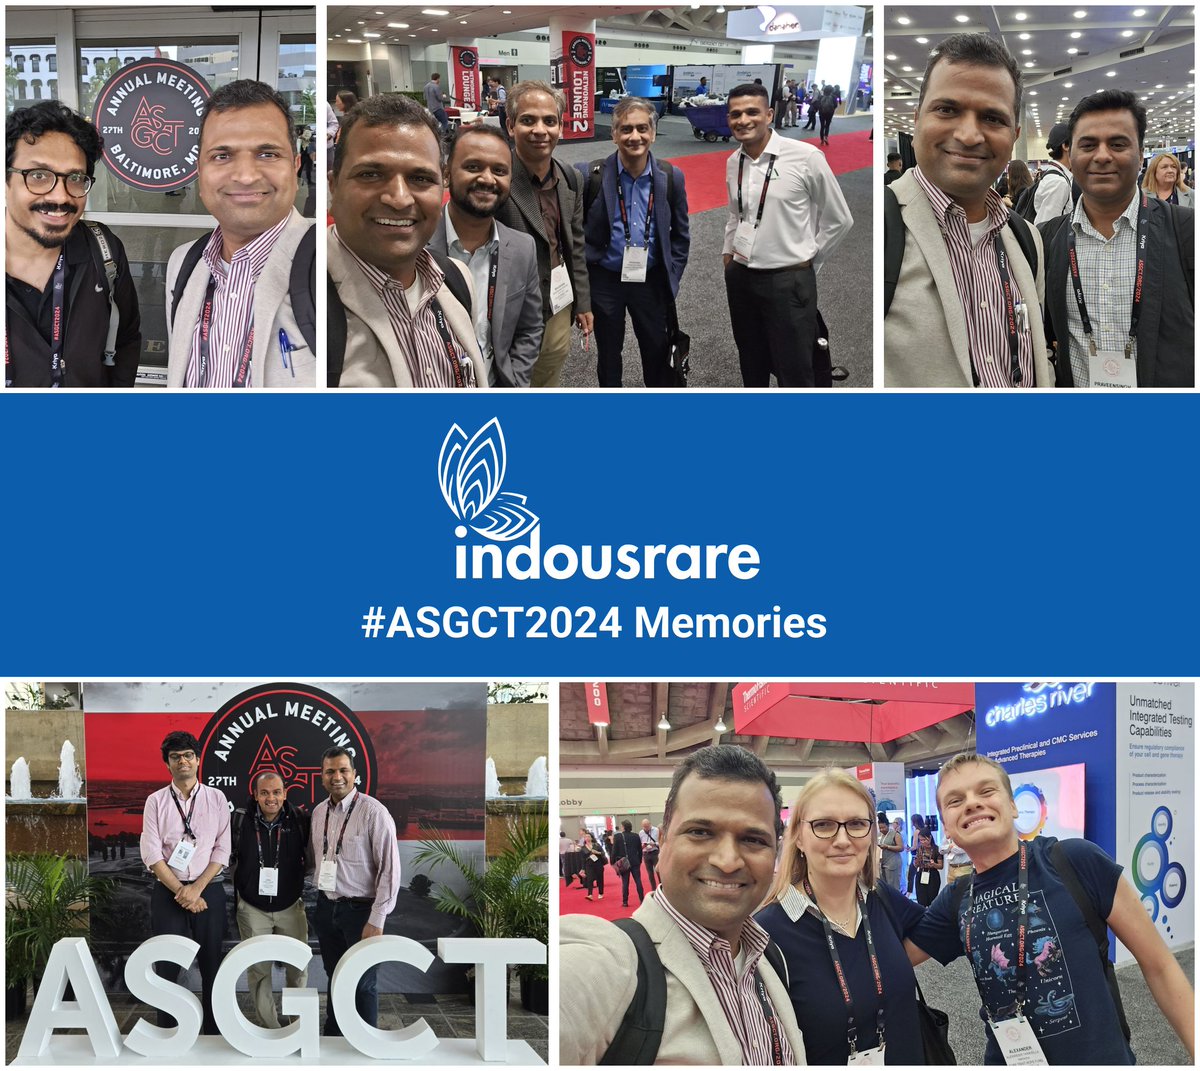 Exciting times at the #ASGCT2024 27th #AnnualMeeting! Our Founder & Executive Chairman, @HarshaRajasimha, enjoyed meeting with dignitaries discussing role of @IndoUSrare in fighting #rarediseases.

Here we share some memories from Baltimore event.

#cellandgenetherapy #indousrare